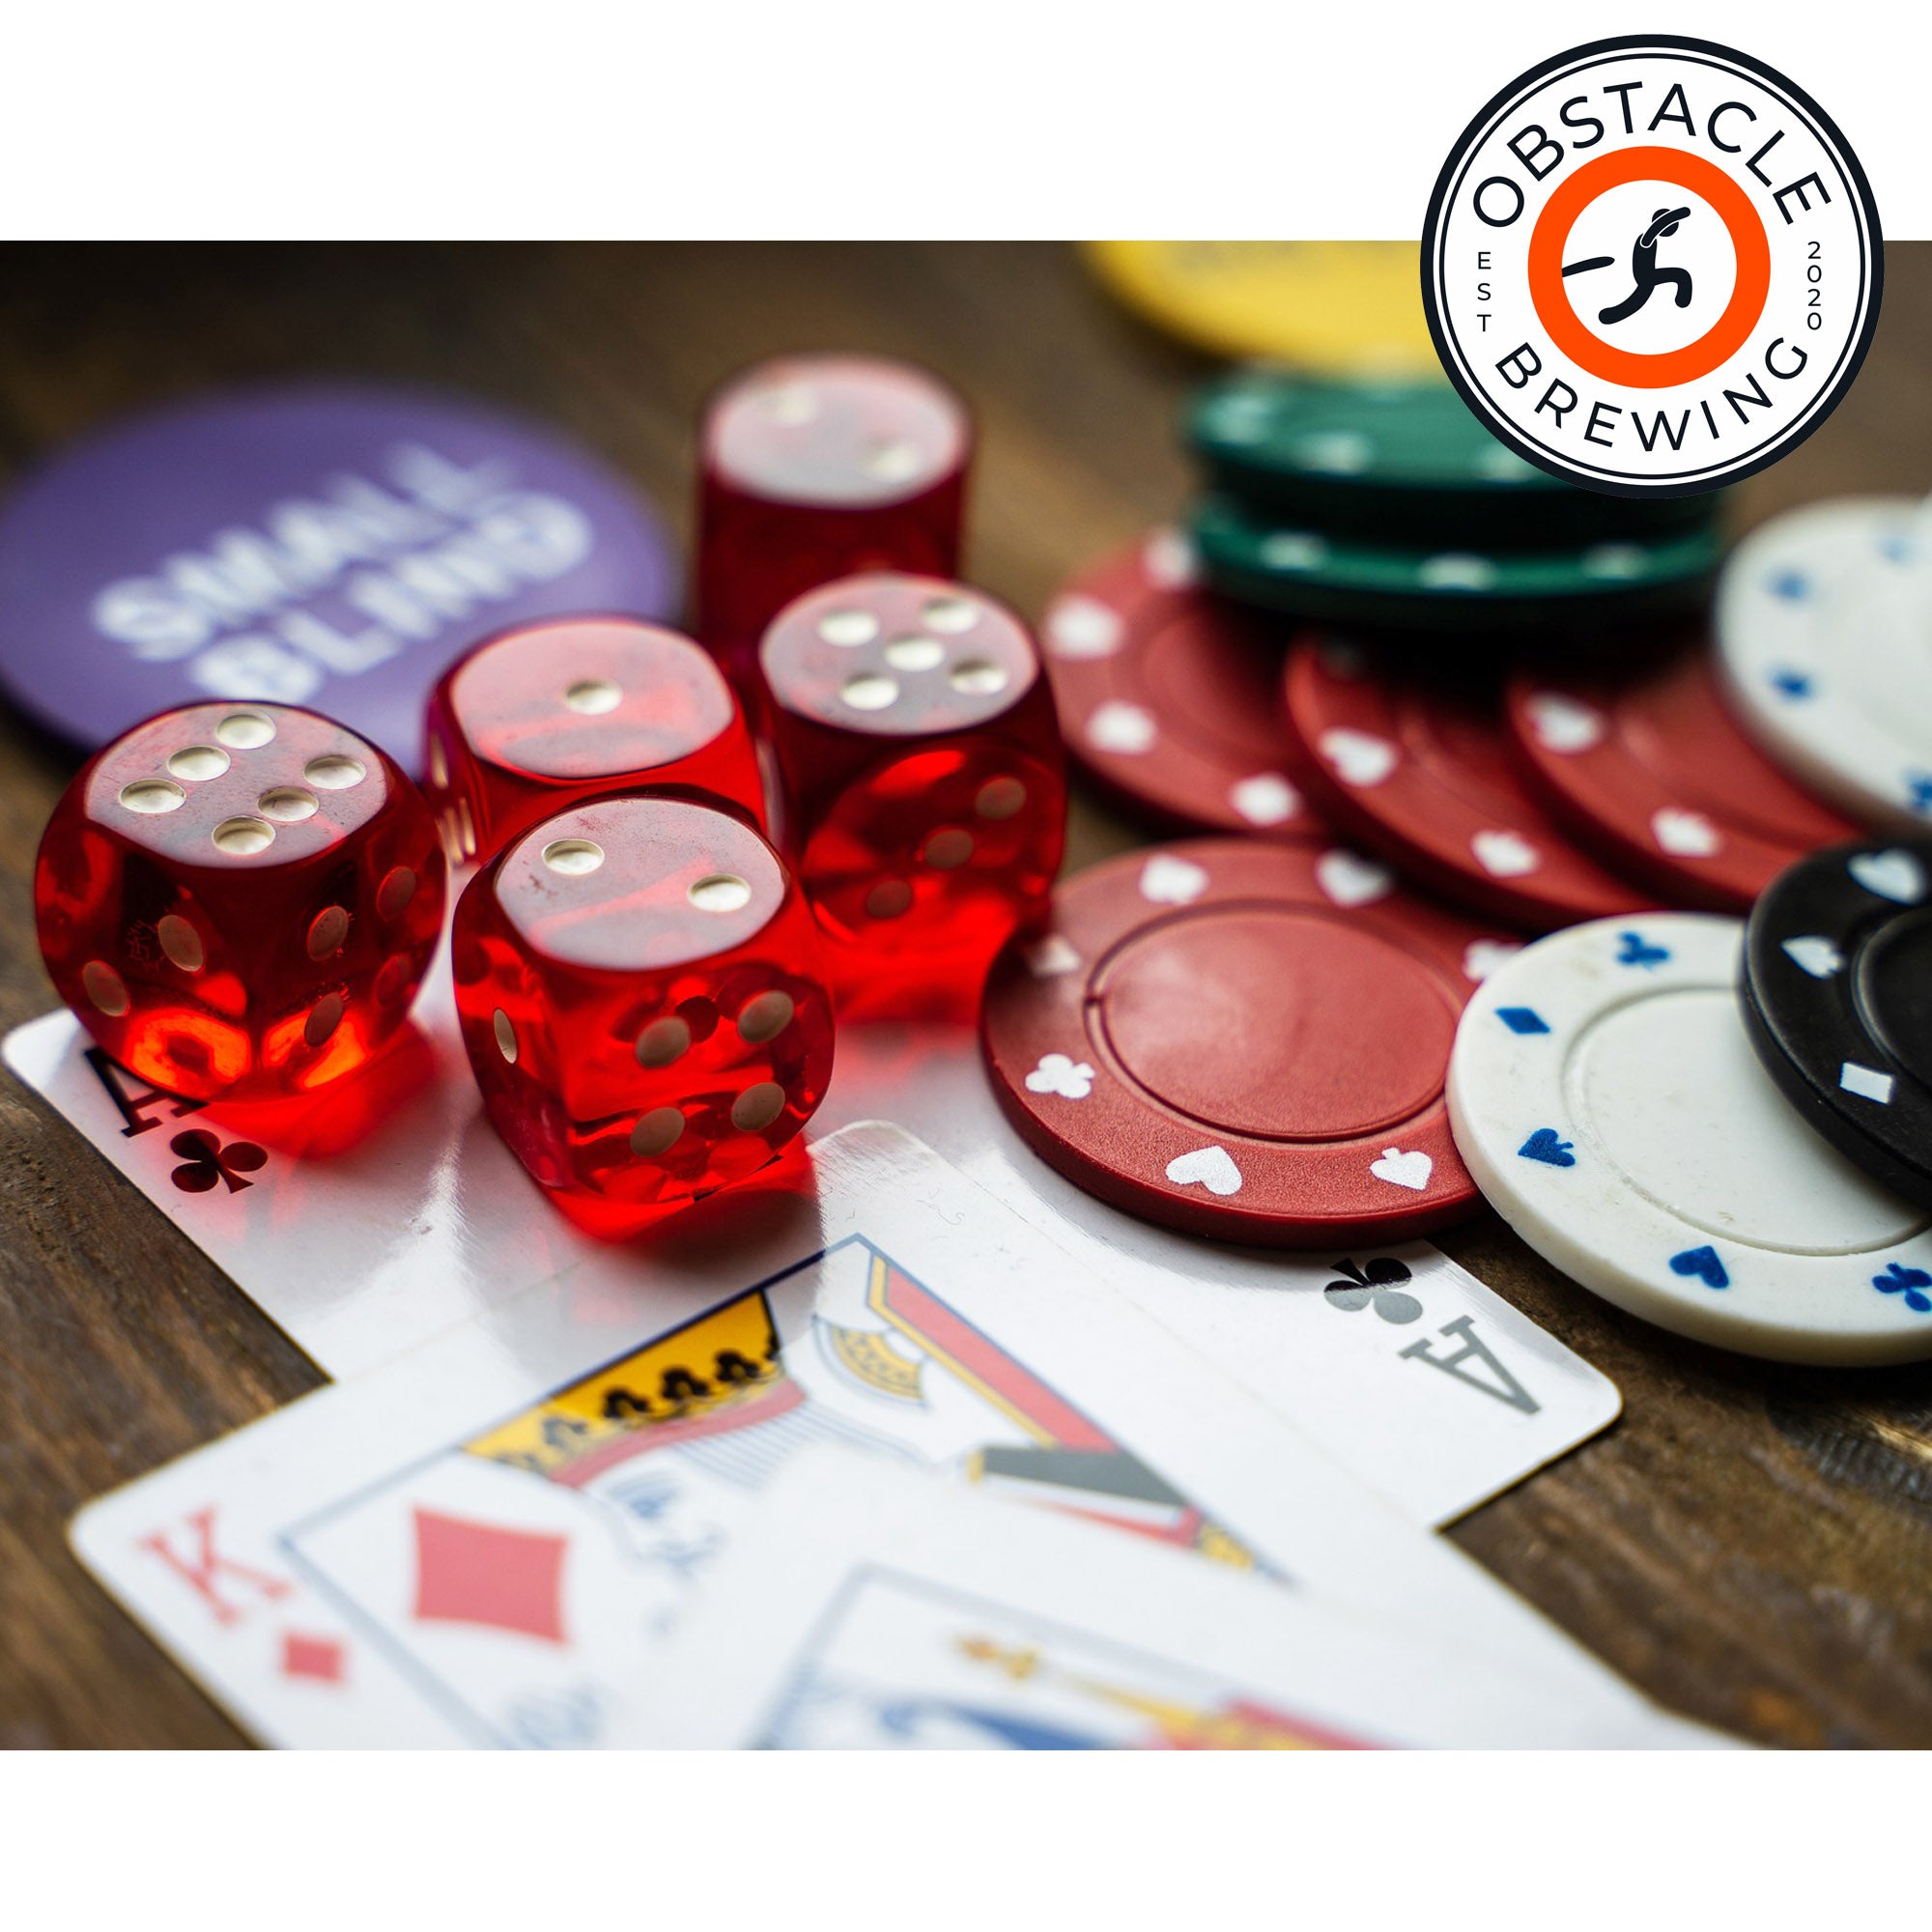 The Art of Poker at Obstacle Brewing - Wed 5.1.24 @ 6P